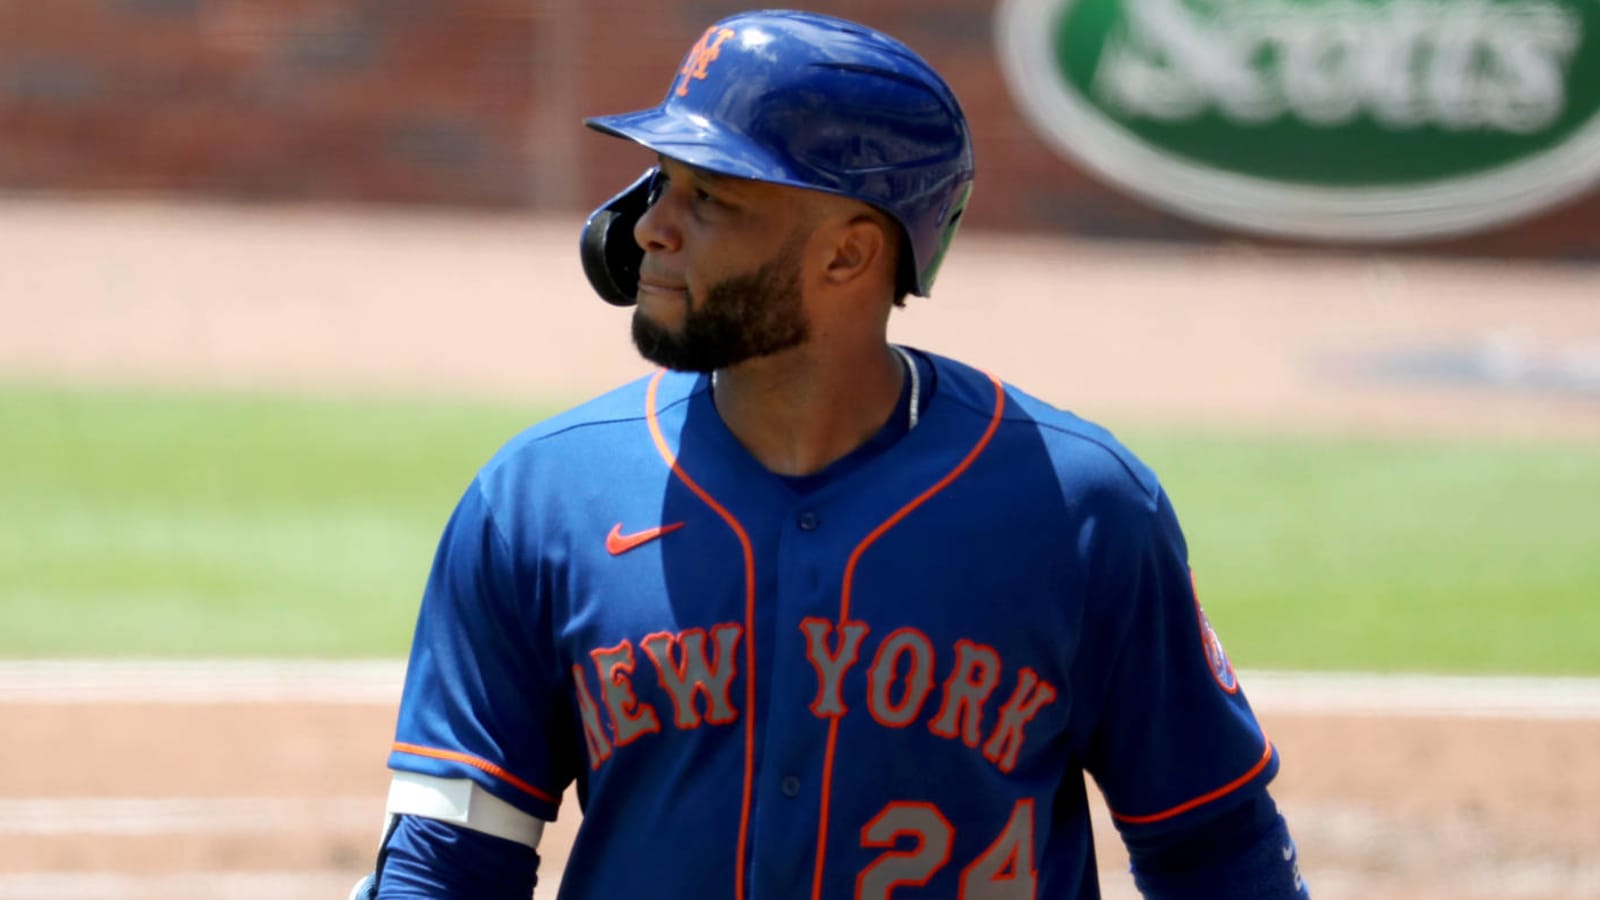 Return of Robinson Cano adds to uncertainty for Mets